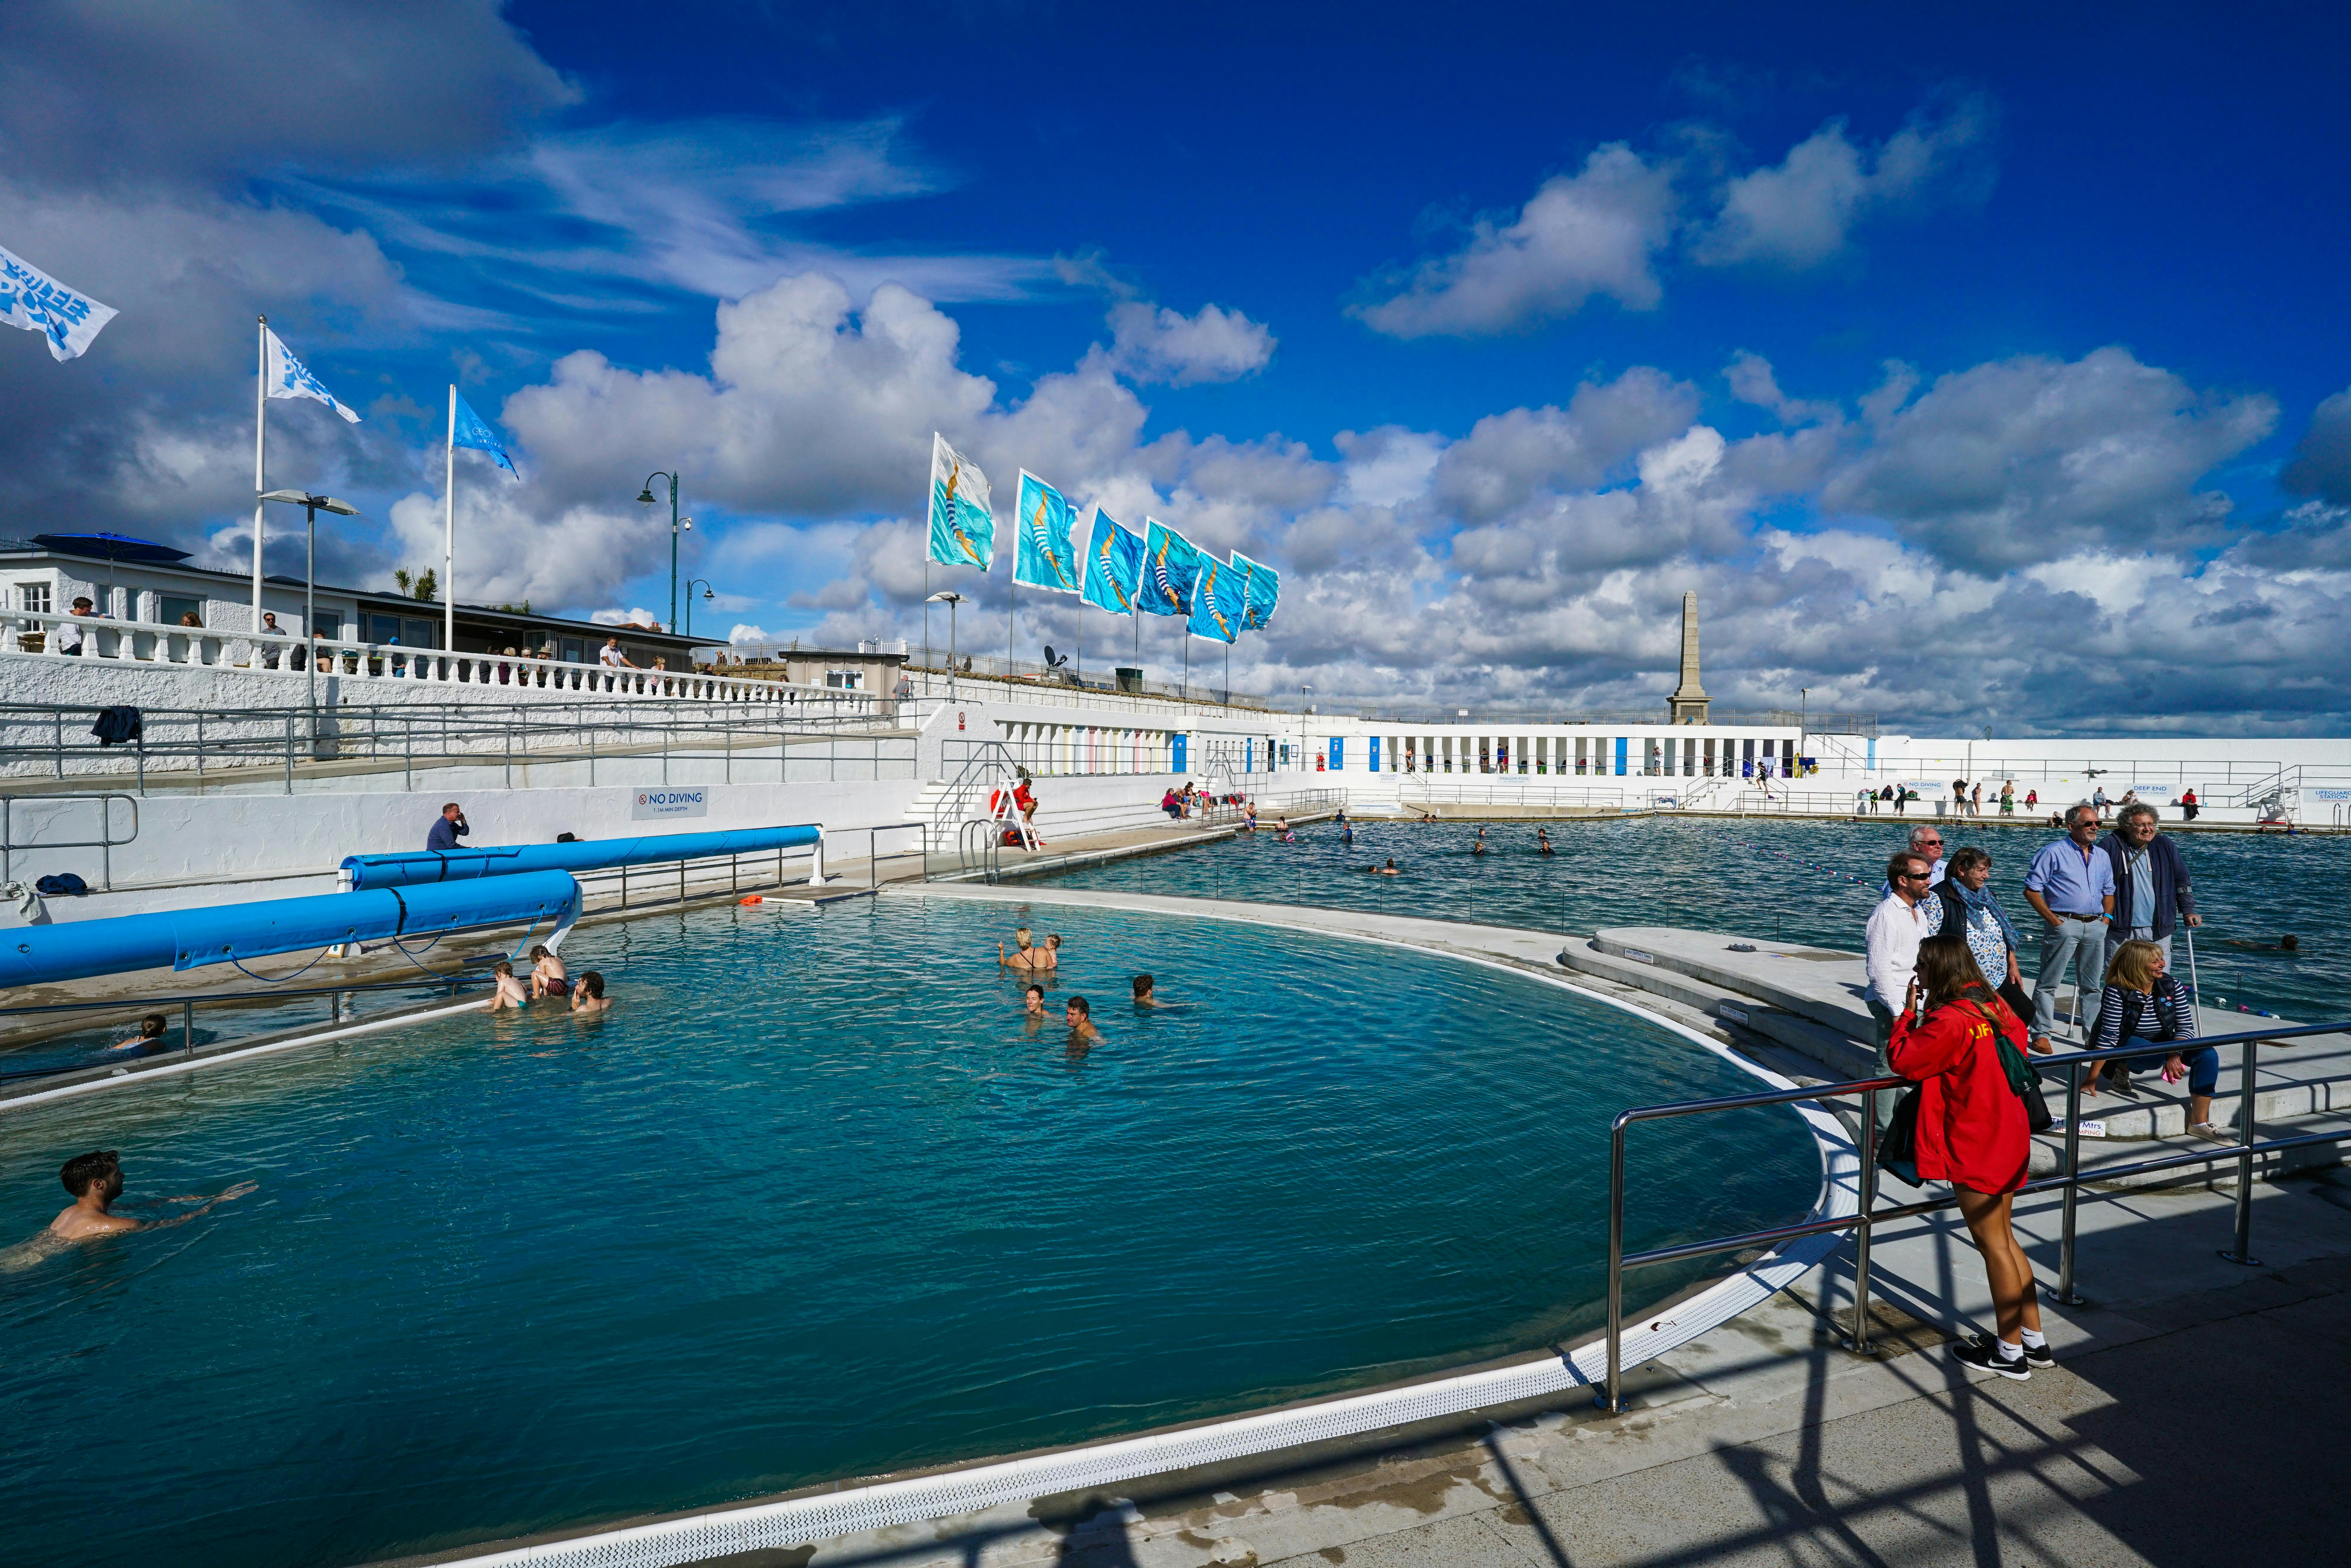 Groups of people enjoy a bathe in Cornwall's new open-air geothermal pool